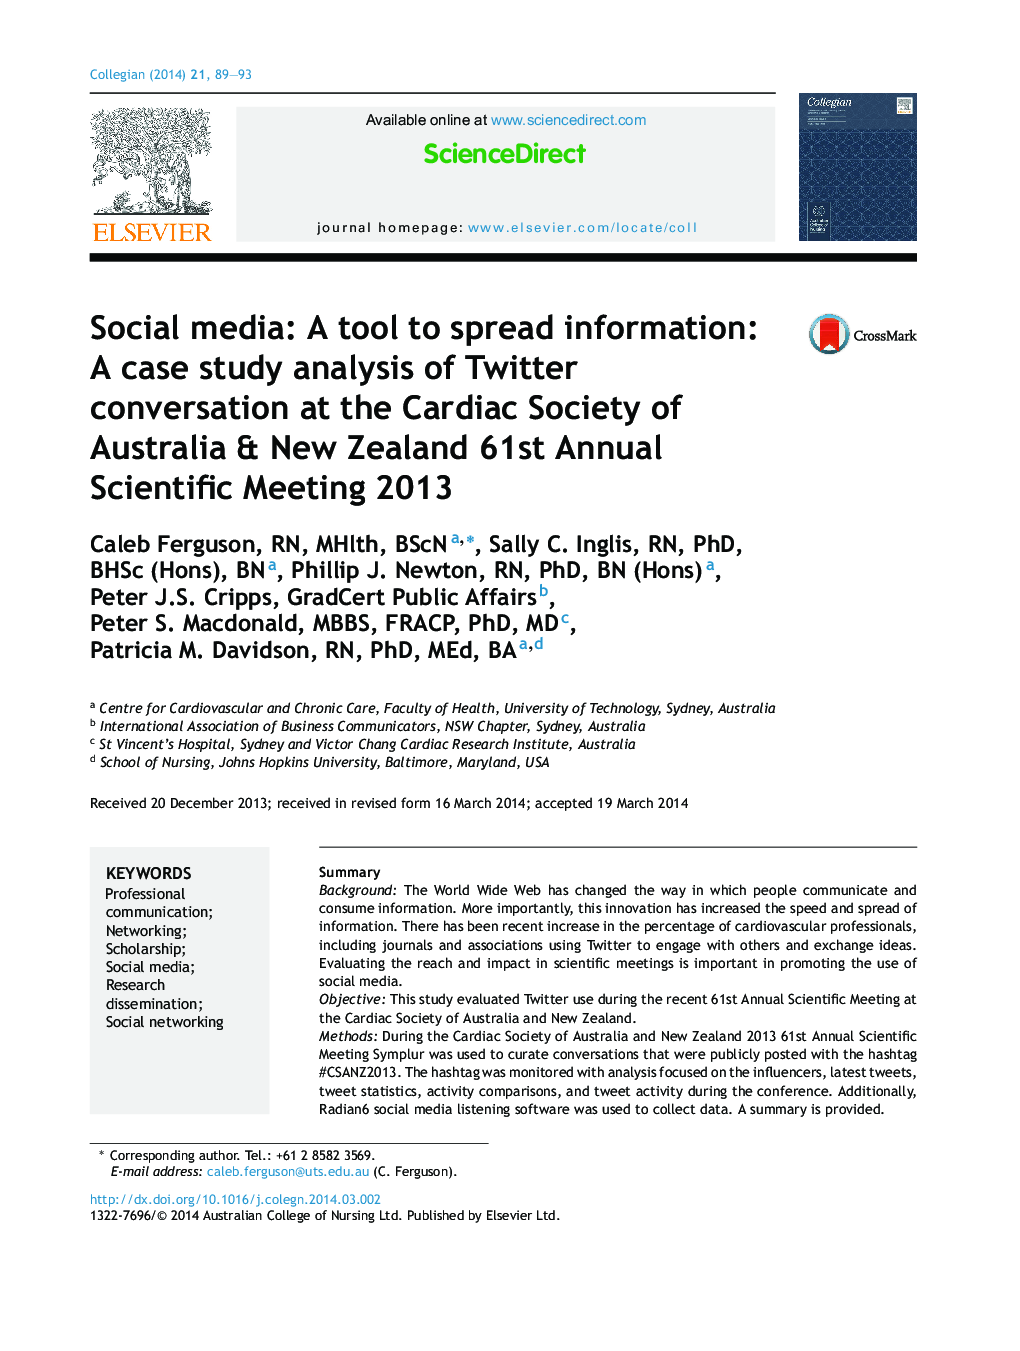 Social media: A tool to spread information: A case study analysis of Twitter conversation at the Cardiac Society of Australia & New Zealand 61st Annual Scientific Meeting 2013